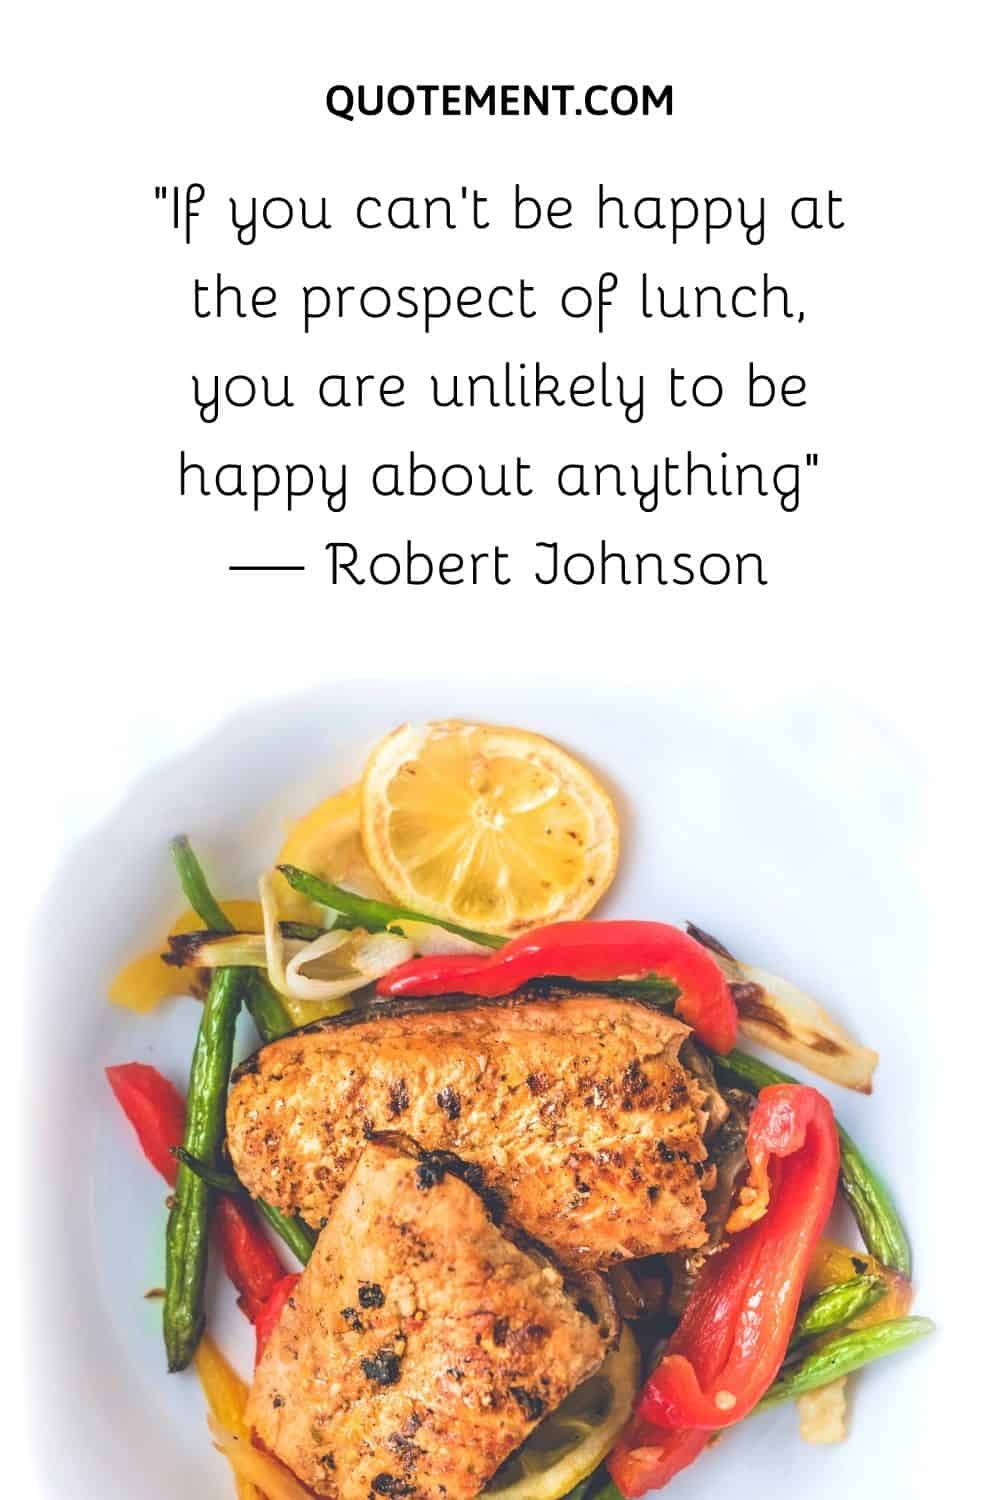 If you can’t be happy at the prospect of lunch, you are unlikely to be happy about anything